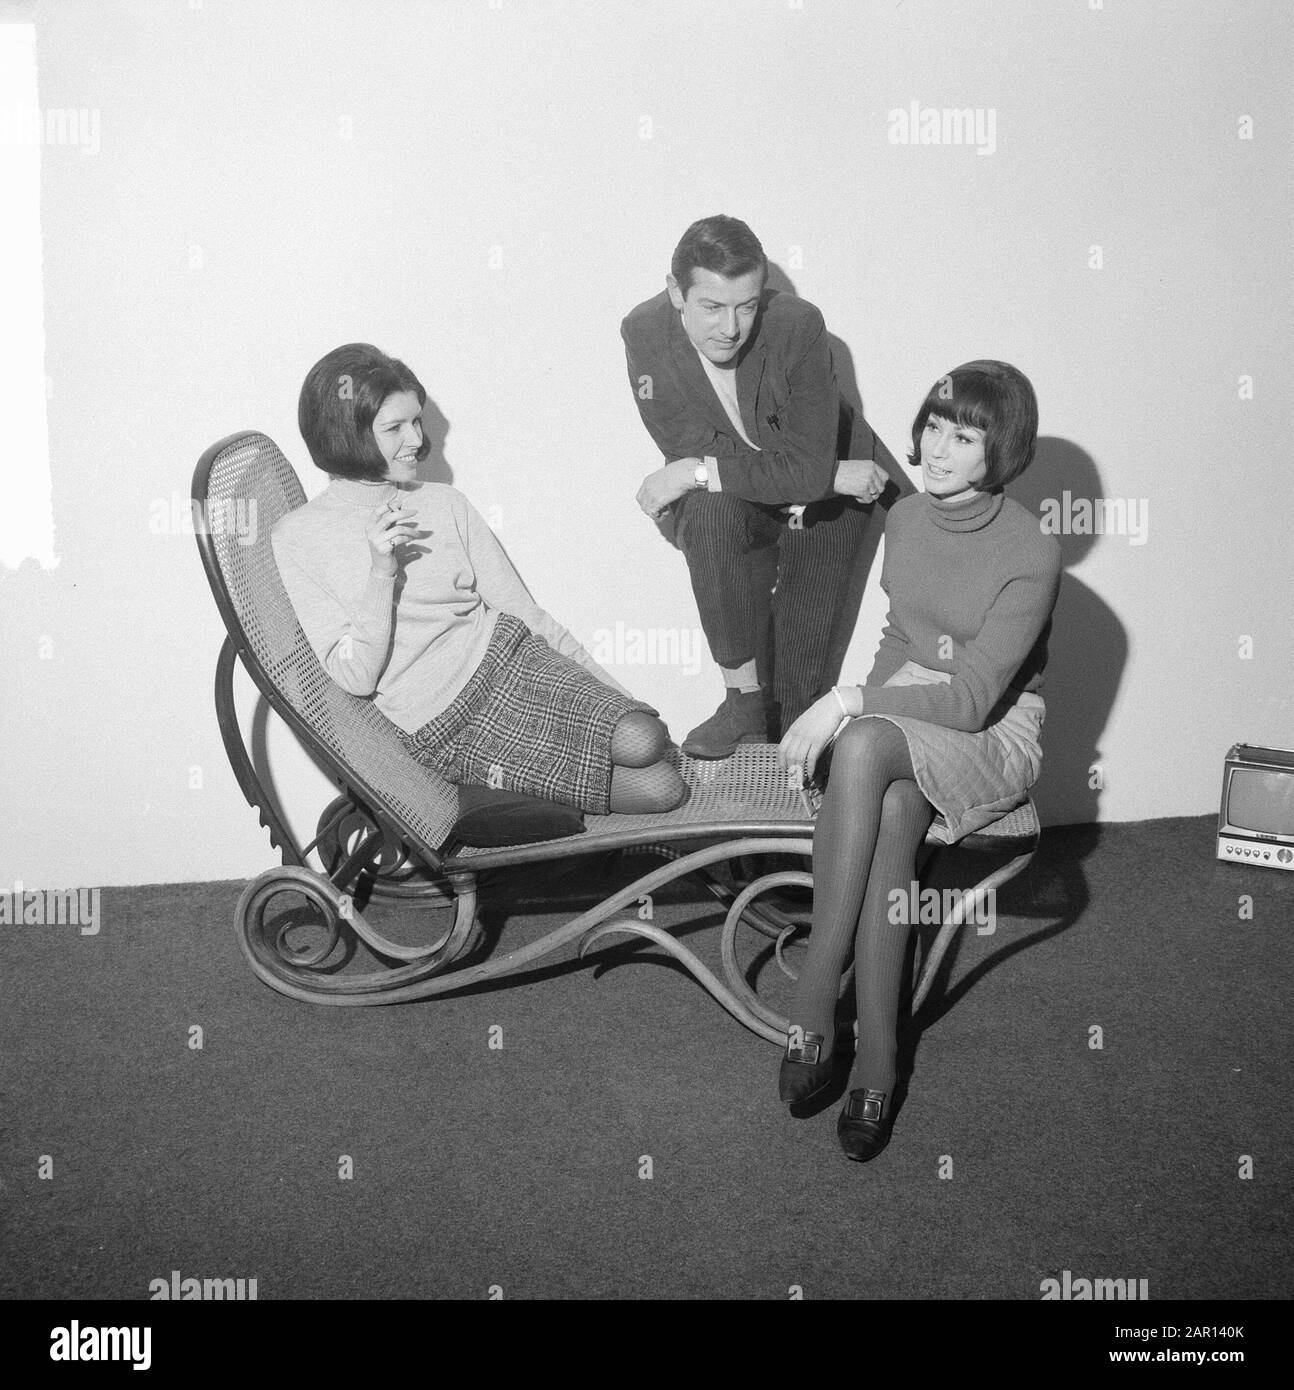 Task Telegraph Annotation: Two young women with turtlenecks and skirts on a wicker lounger in the middle a man in turtleneck. On the right you can see a mini television Date: 28 January 1965 Institution name: Telegraph Stock Photo